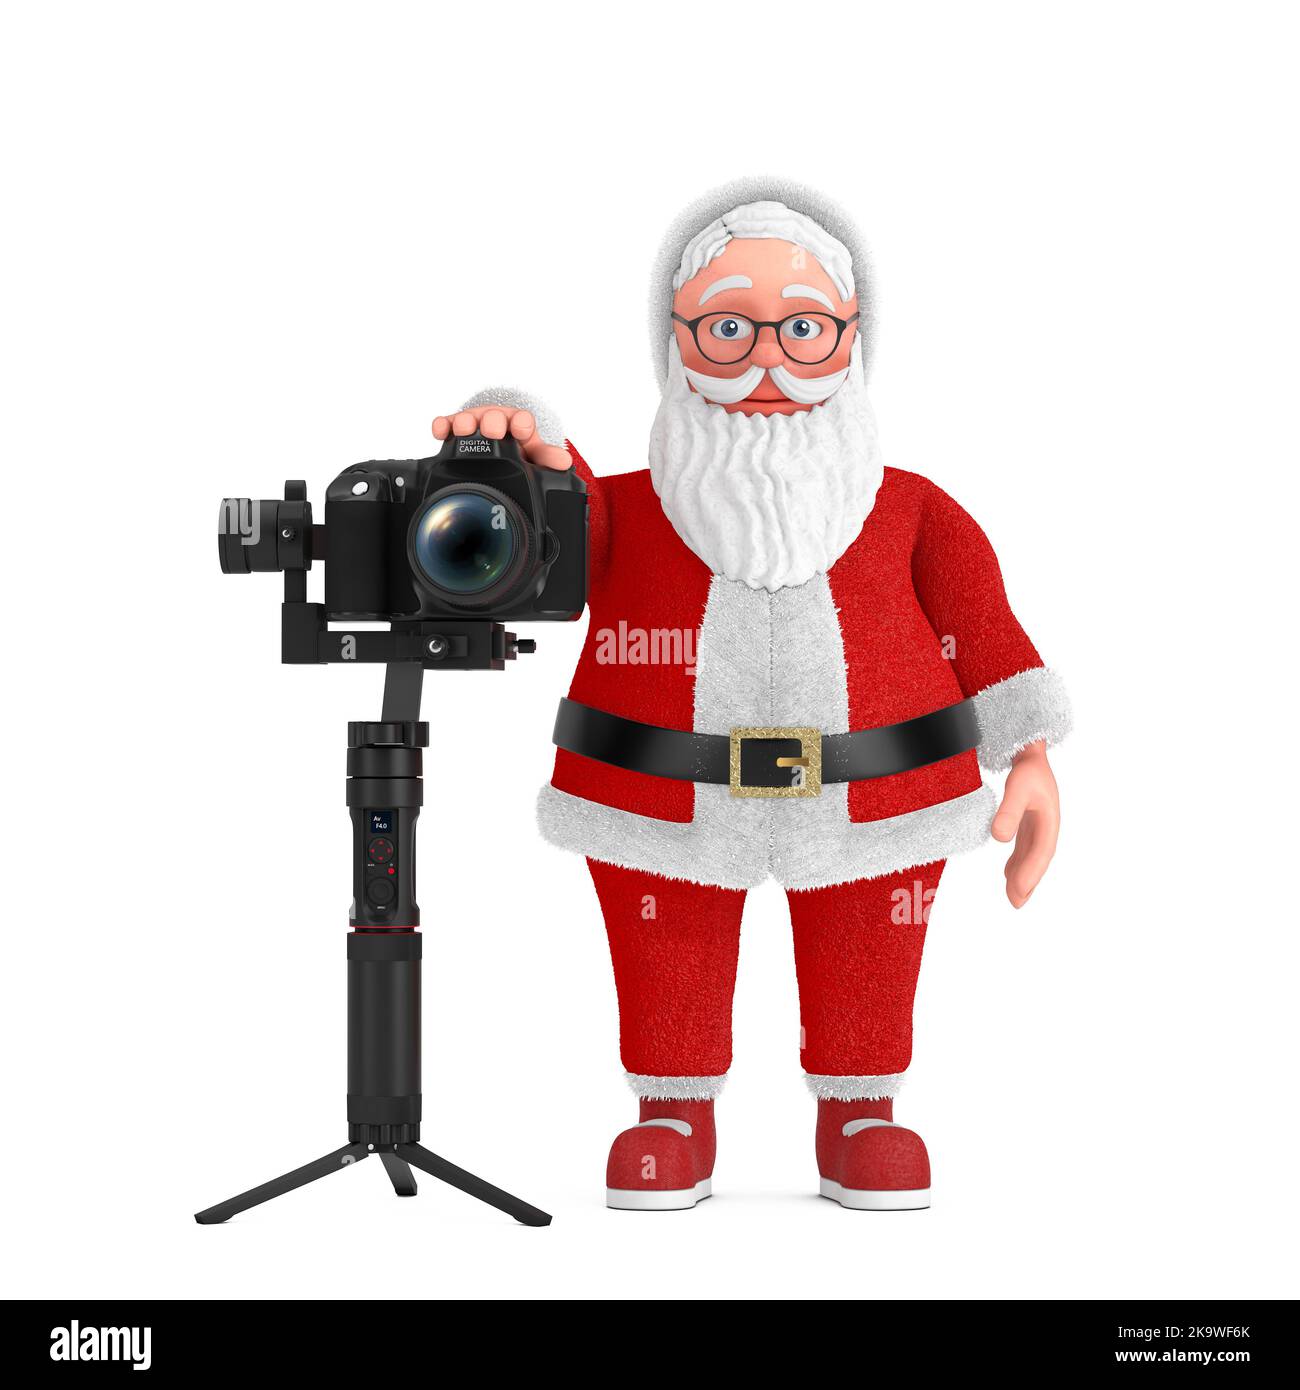 Cartoon Cheerful Santa Claus Granpa with DSLR or Video Camera Gimbal Stabilization Tripod System on a white background. 3d Rendering Stock Photo